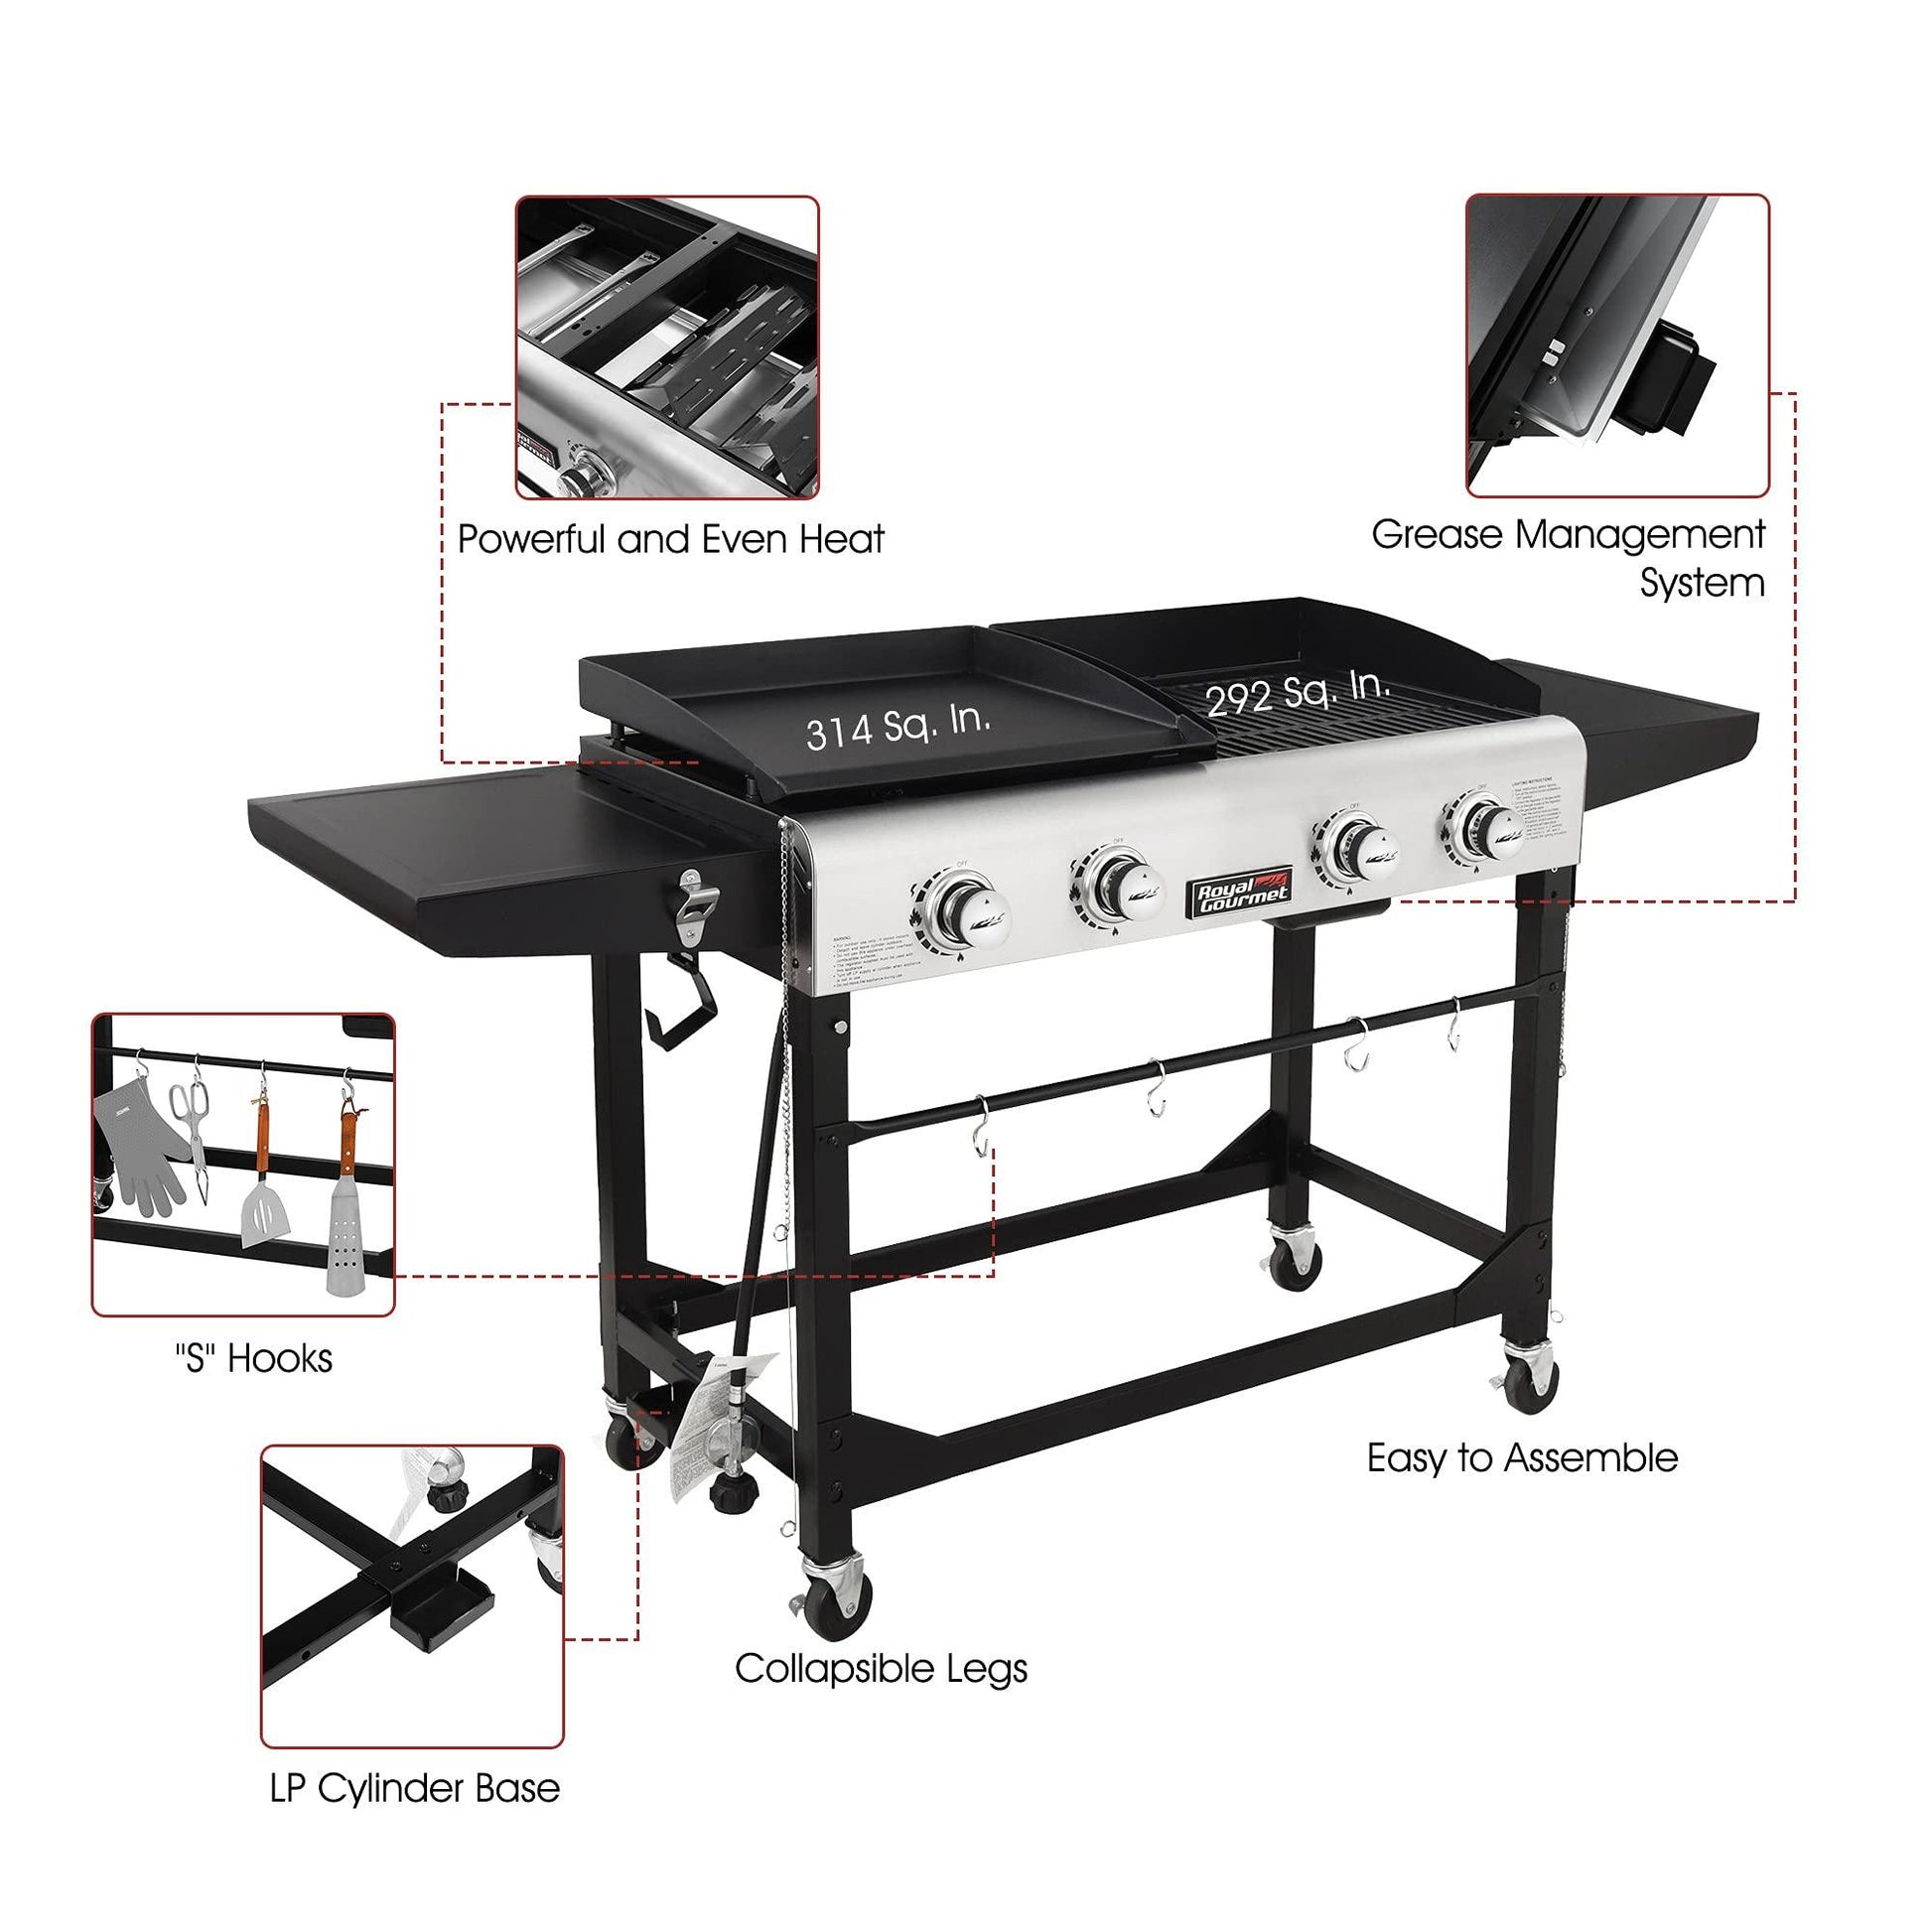 Royal Gourmet GD401 Portable Propane Gas Grill and Griddle Combo with Side Table | 4-Burner, Folding Legs,Versatile, Outdoor | Black 66 Inch - CookCave